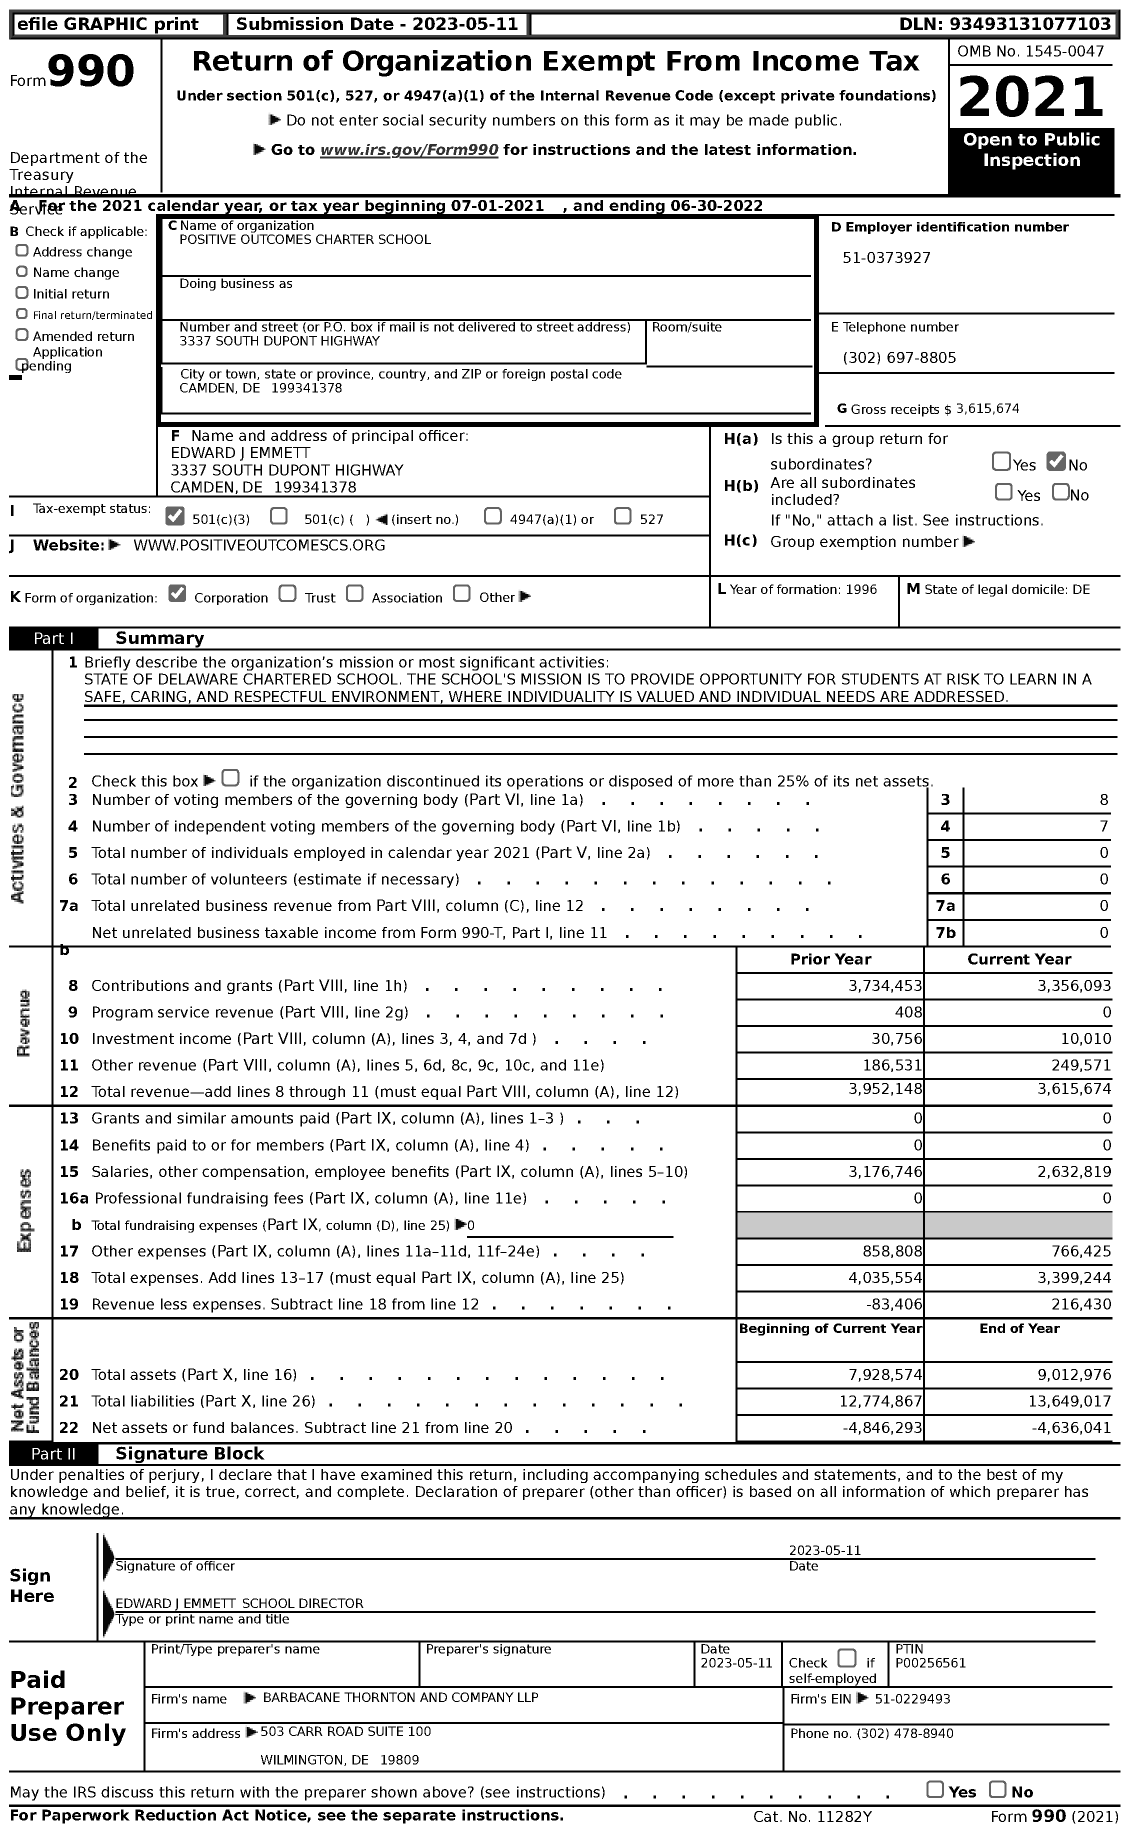 Image of first page of 2021 Form 990 for Positive Outcomes Charter School